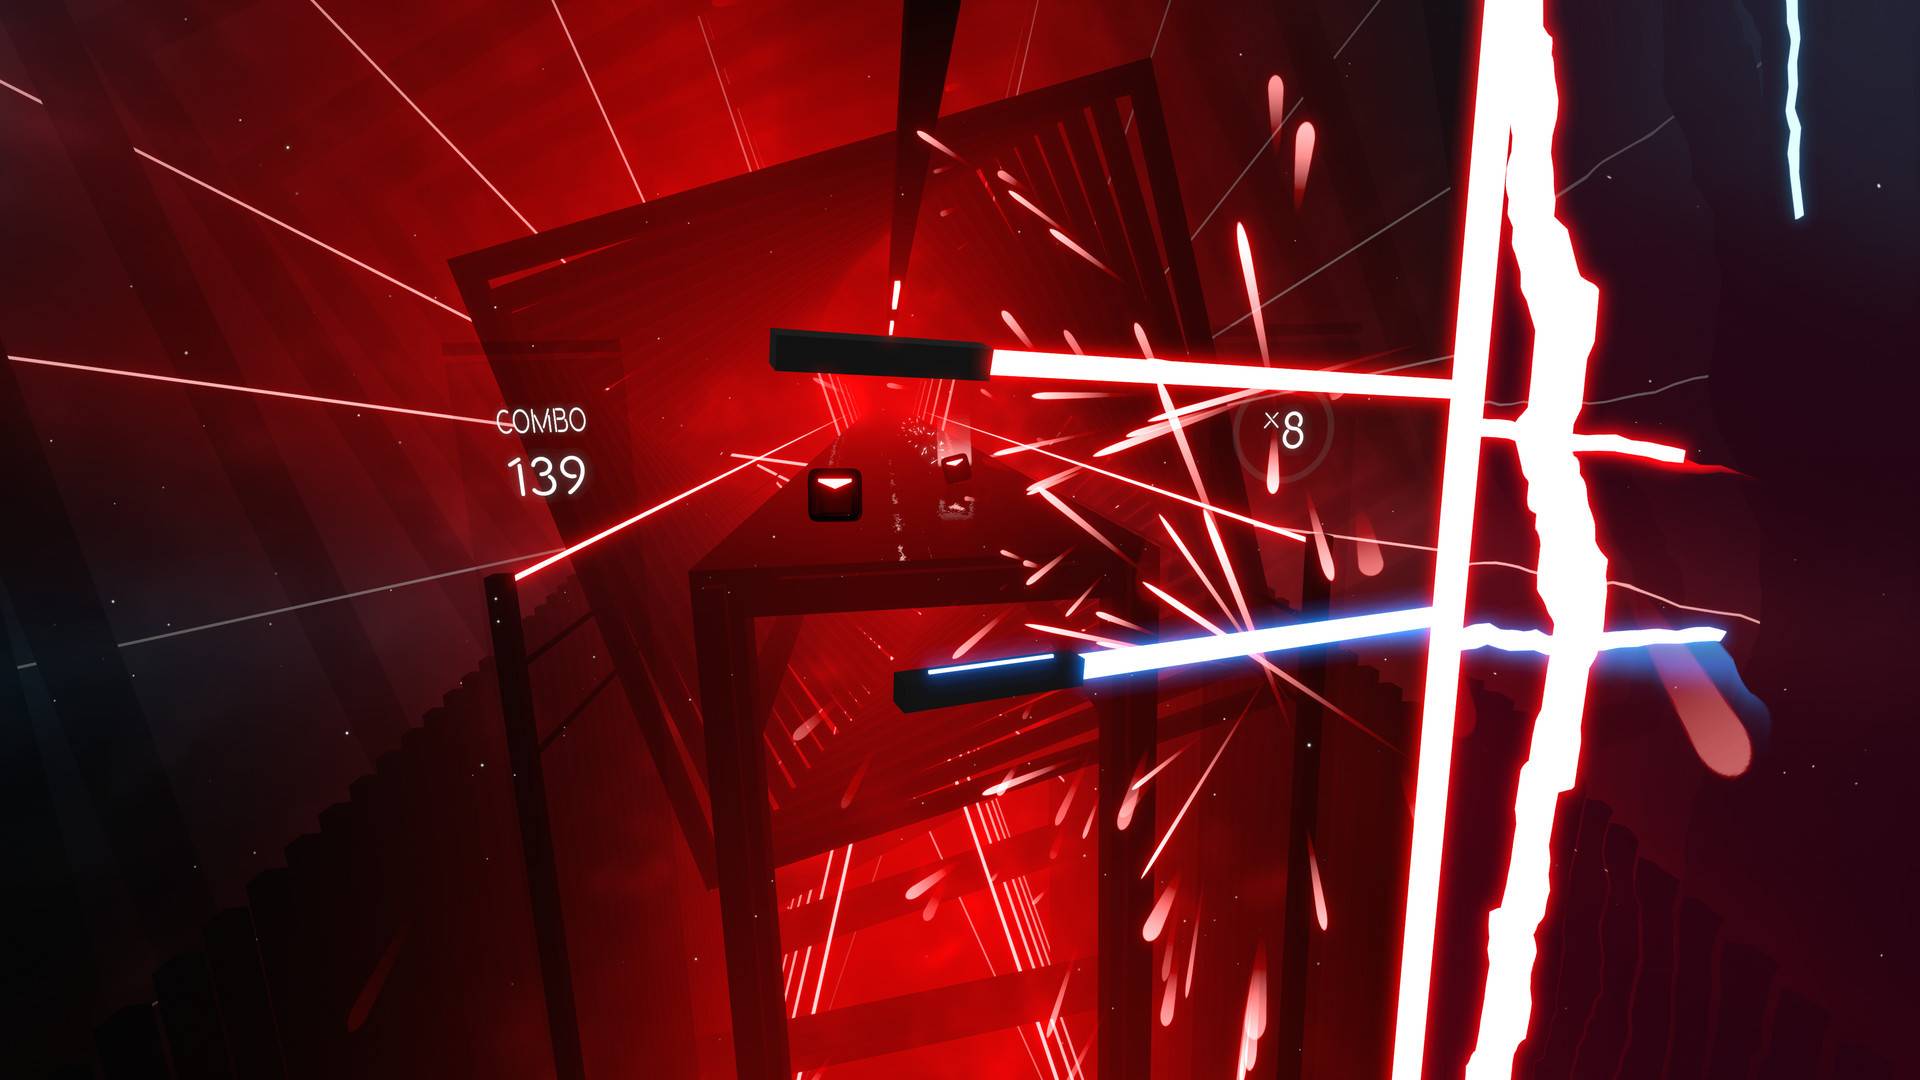 Kammerat Eve Mindful Beat Saber (PC) Key cheap - Price of $24.04 for Steam